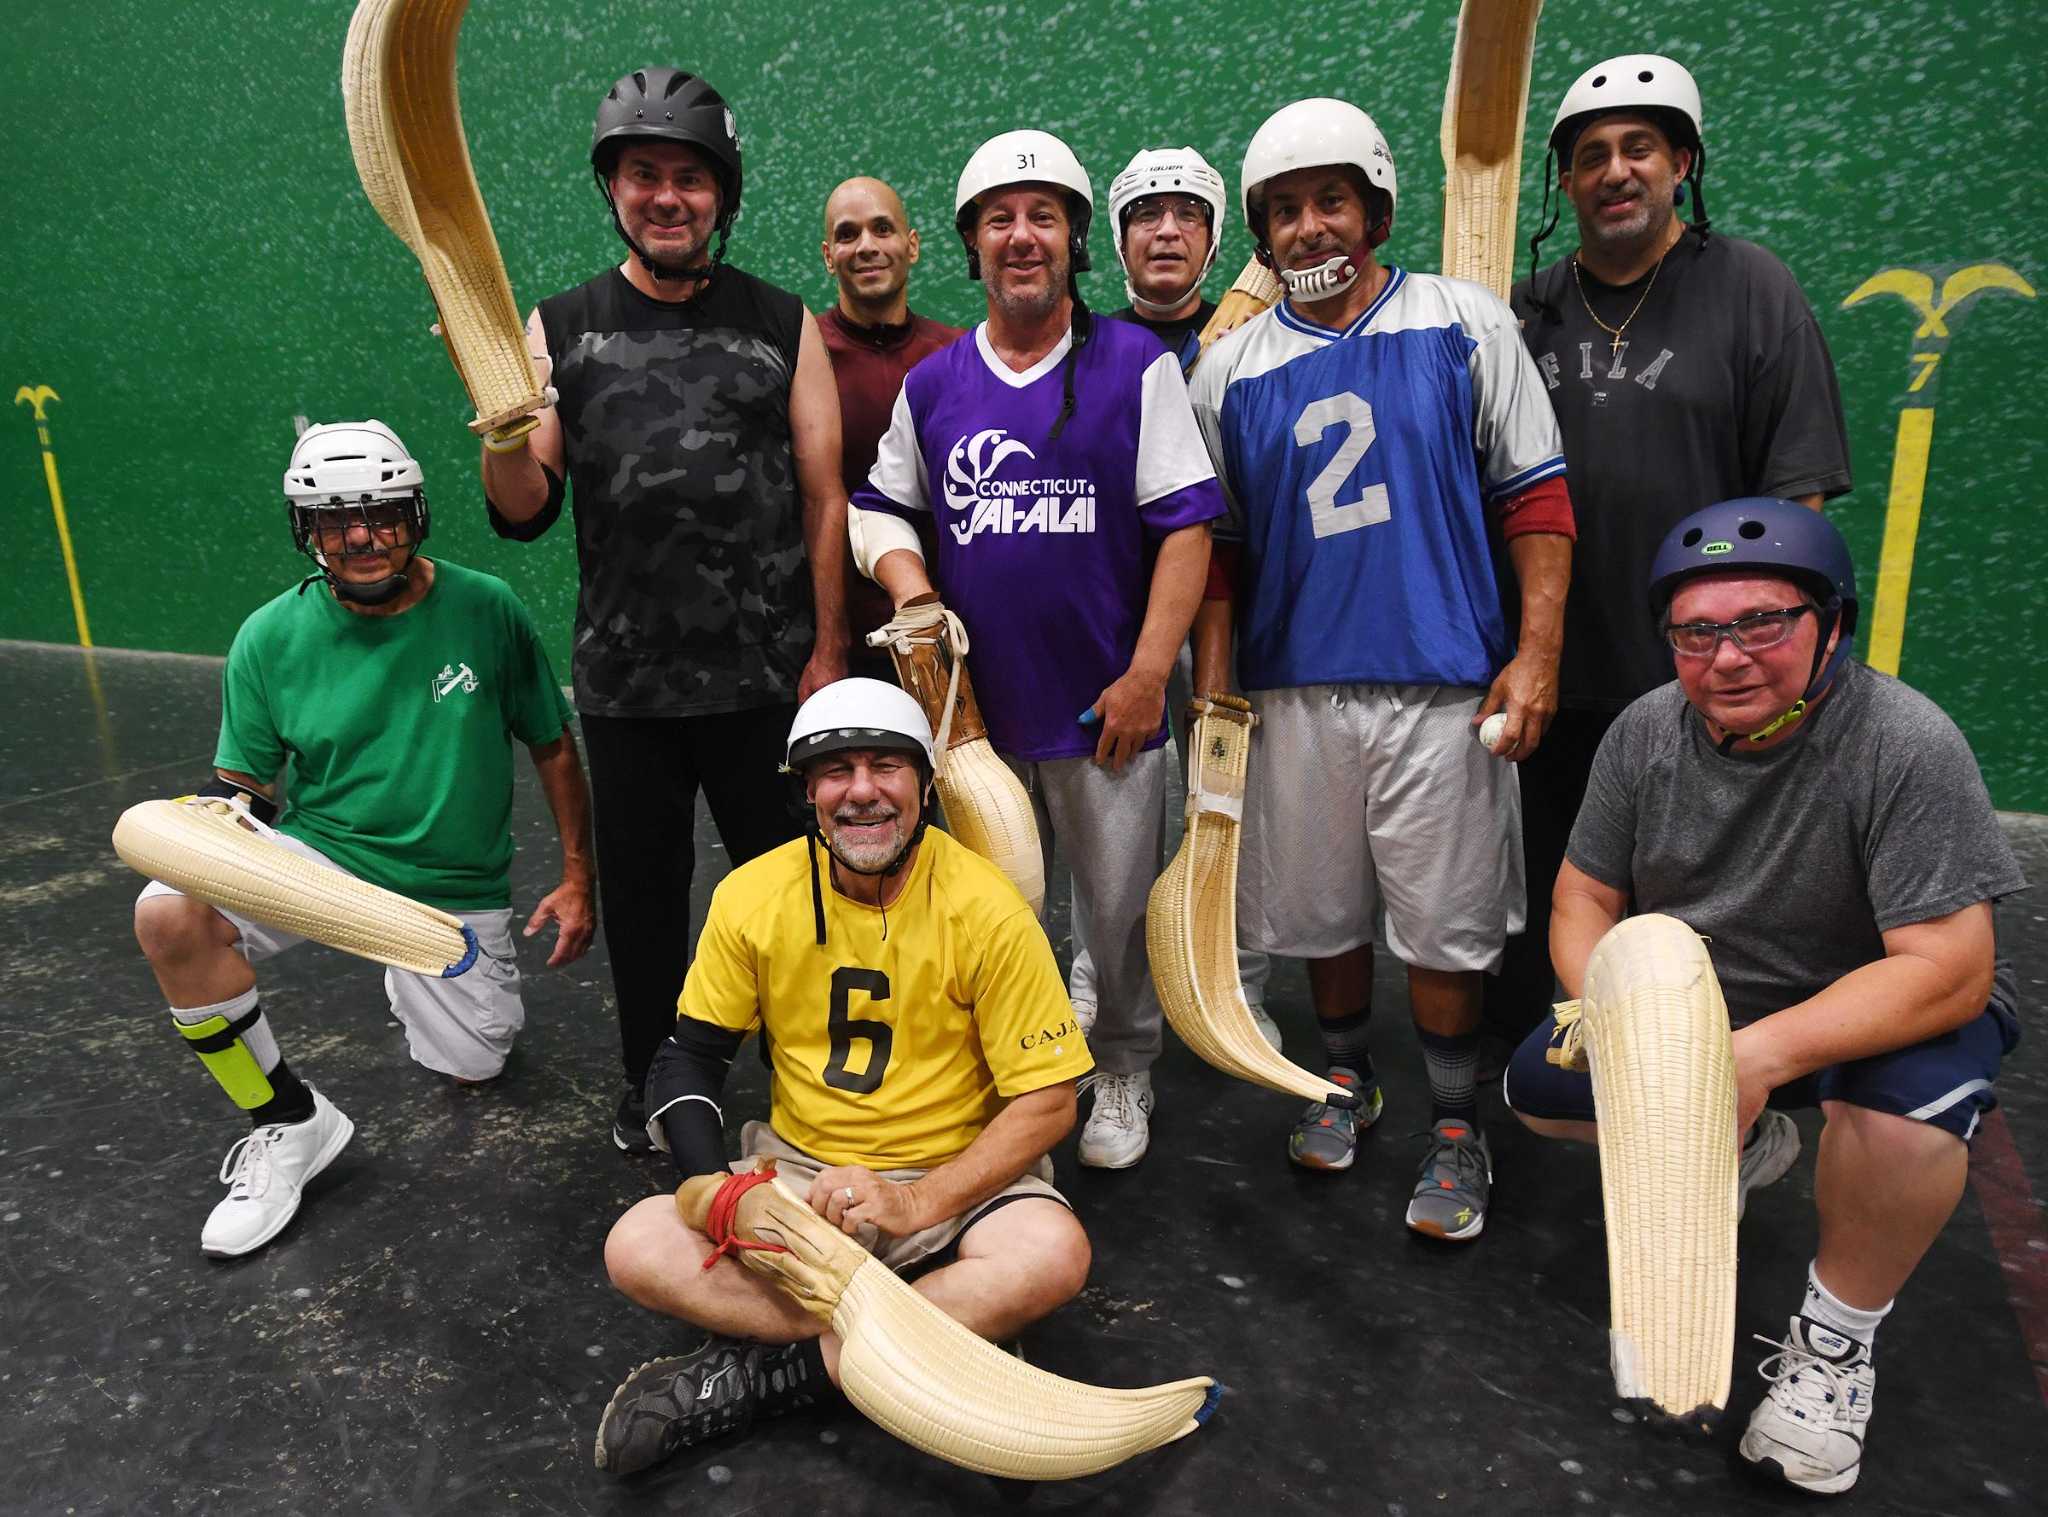 Connecticut Amateur Jai-Alai draws players of all levels 20 years after states last pro fronton closed